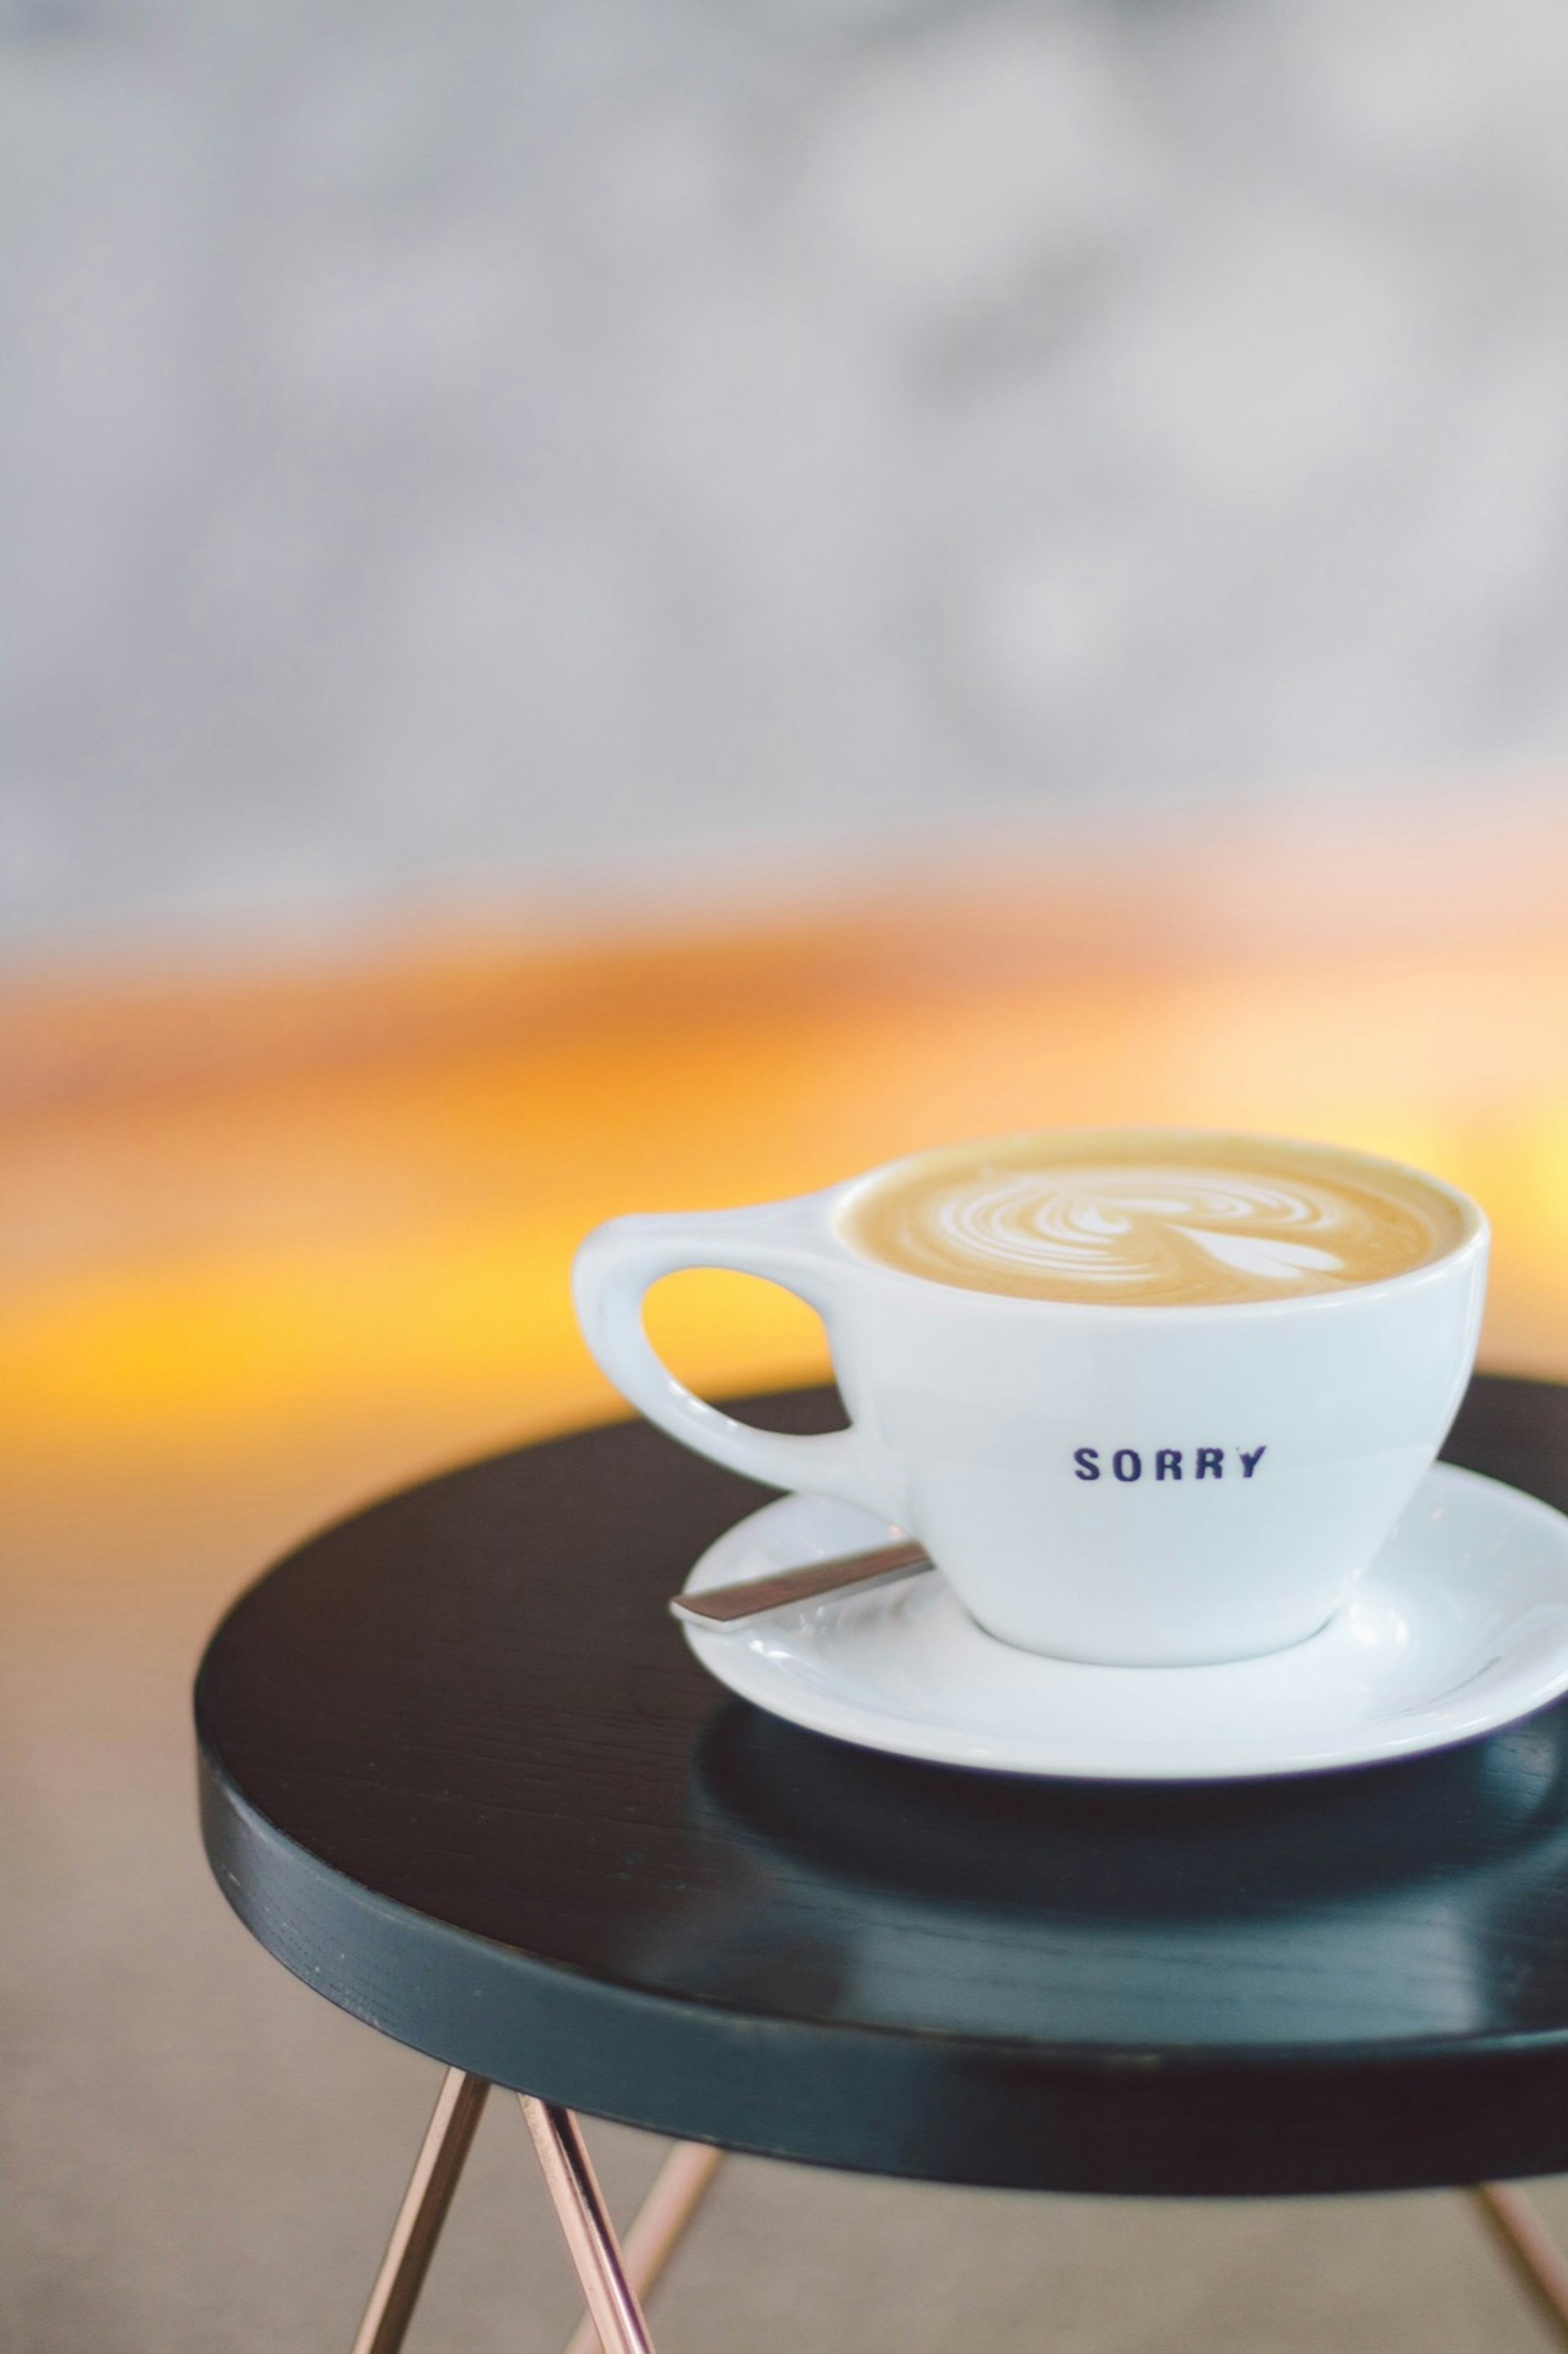 The word 'Sorry' is written on the side of a shallow white mug on a black table © Jessica Lam / Lonely Planet